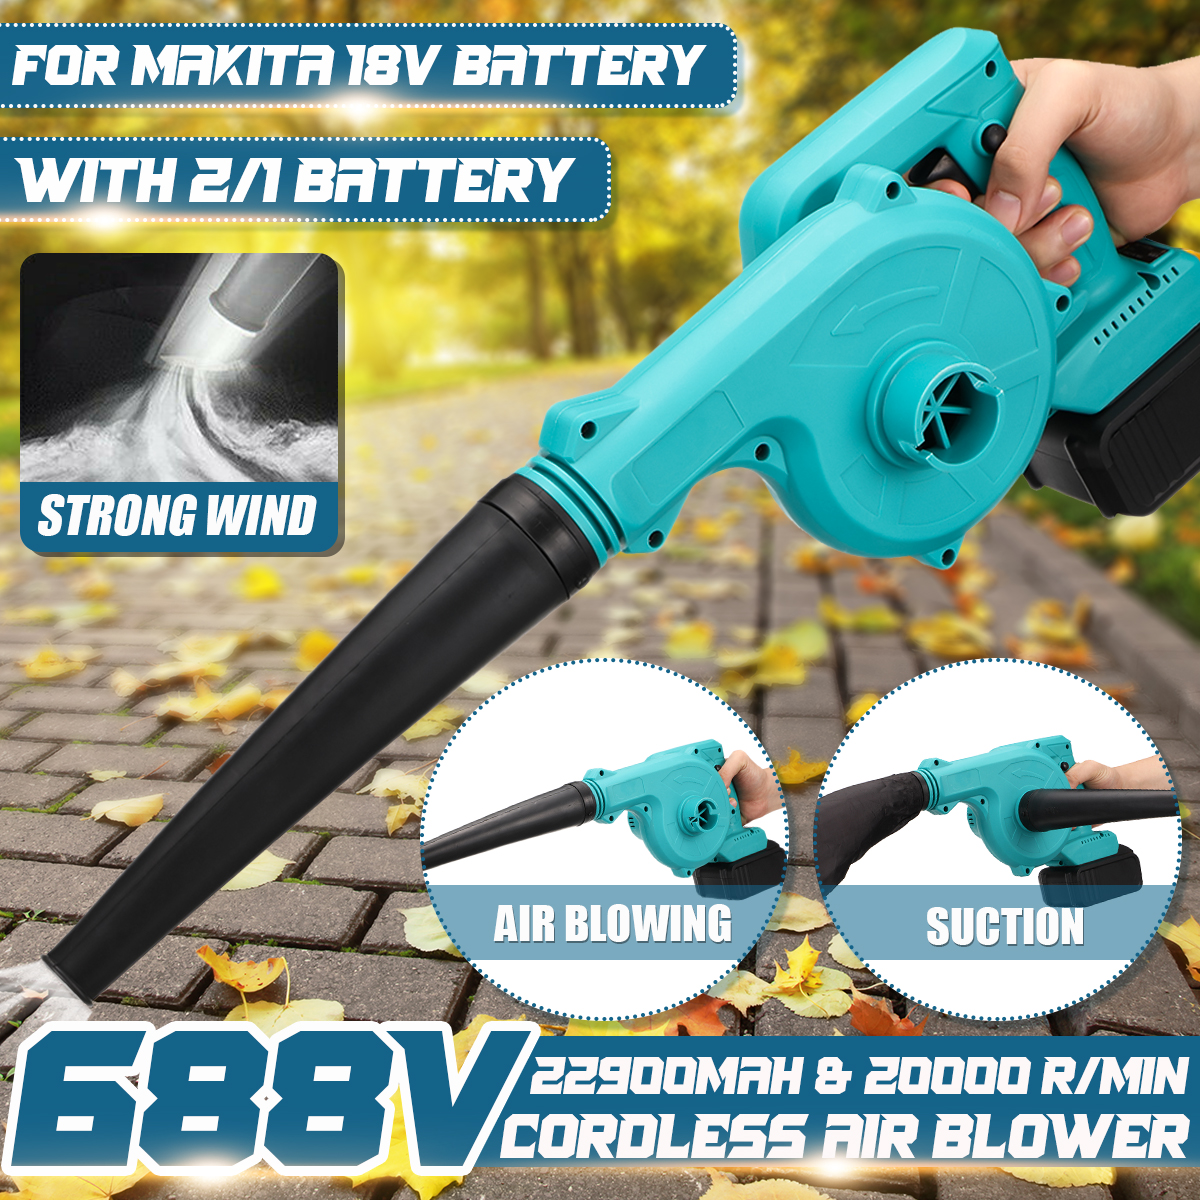 688VF-54-KPA-Brushless-Air-Blower-Suction-Cleaner-Power-Indicator-Cordless-Electric-Air-Blower--Suct-1855376-1